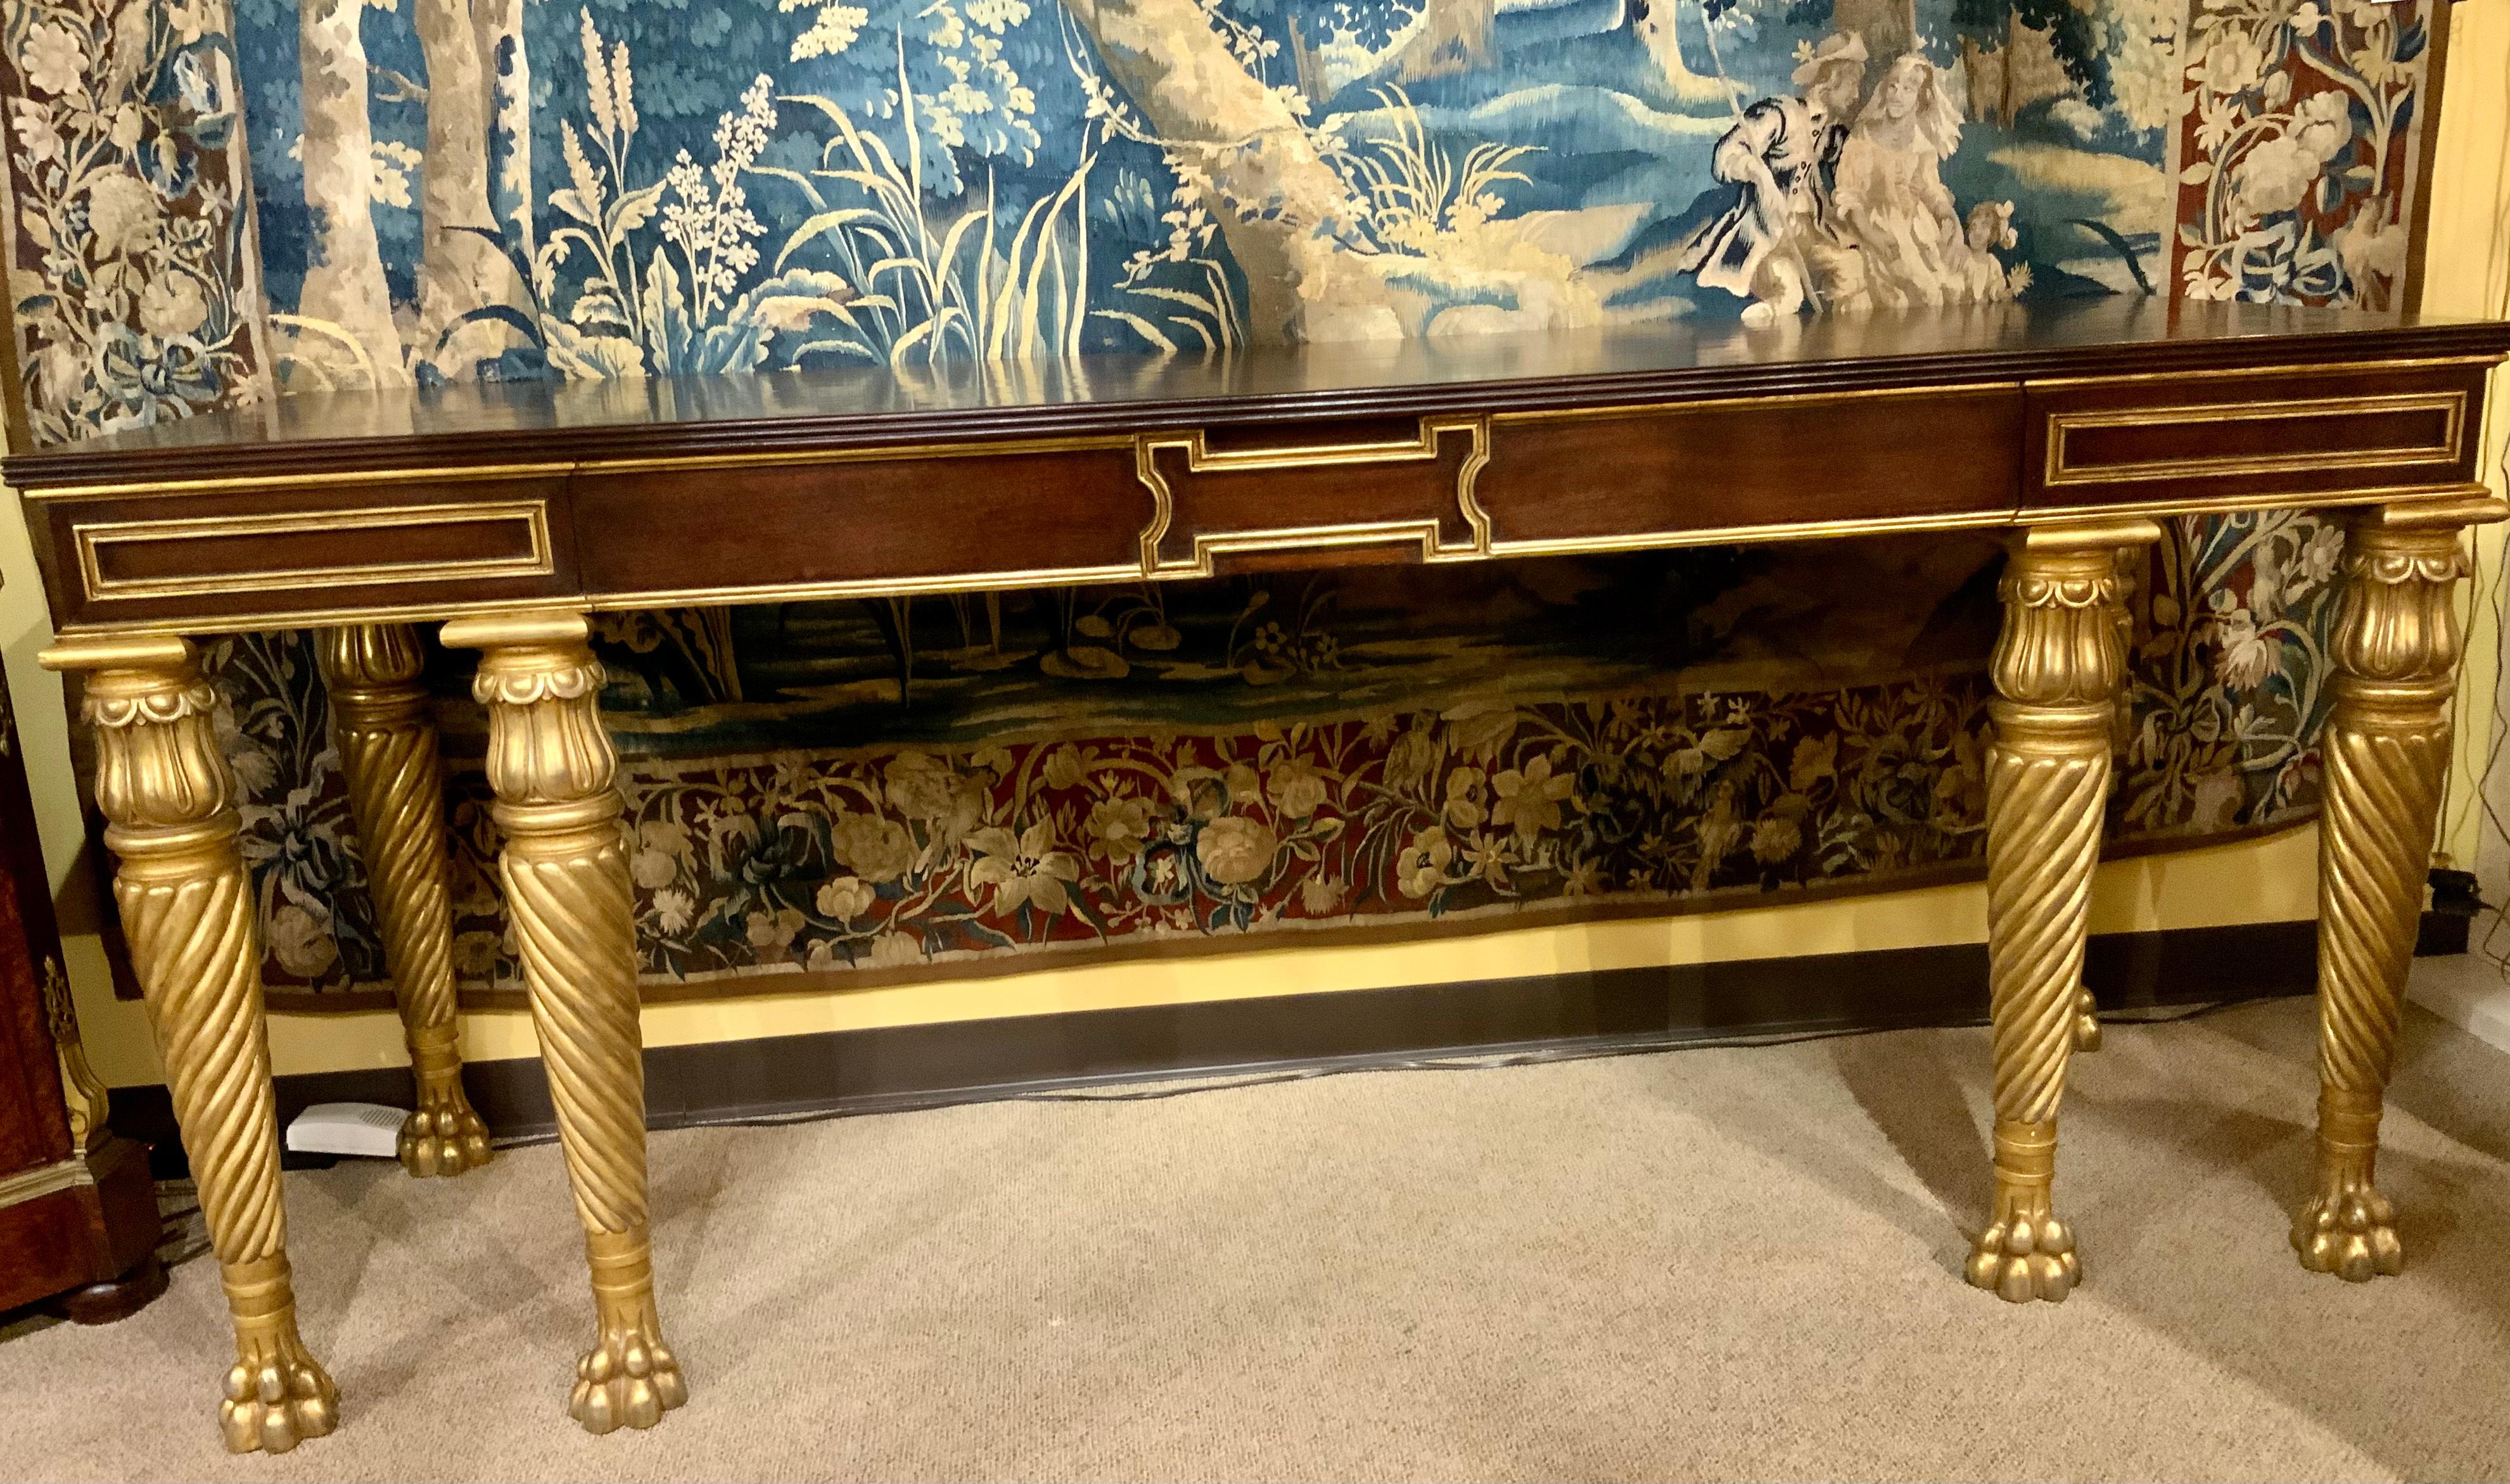 Mahogany Console with Gilt Carved Legs and Designs in Neoclassical Taste For Sale 4